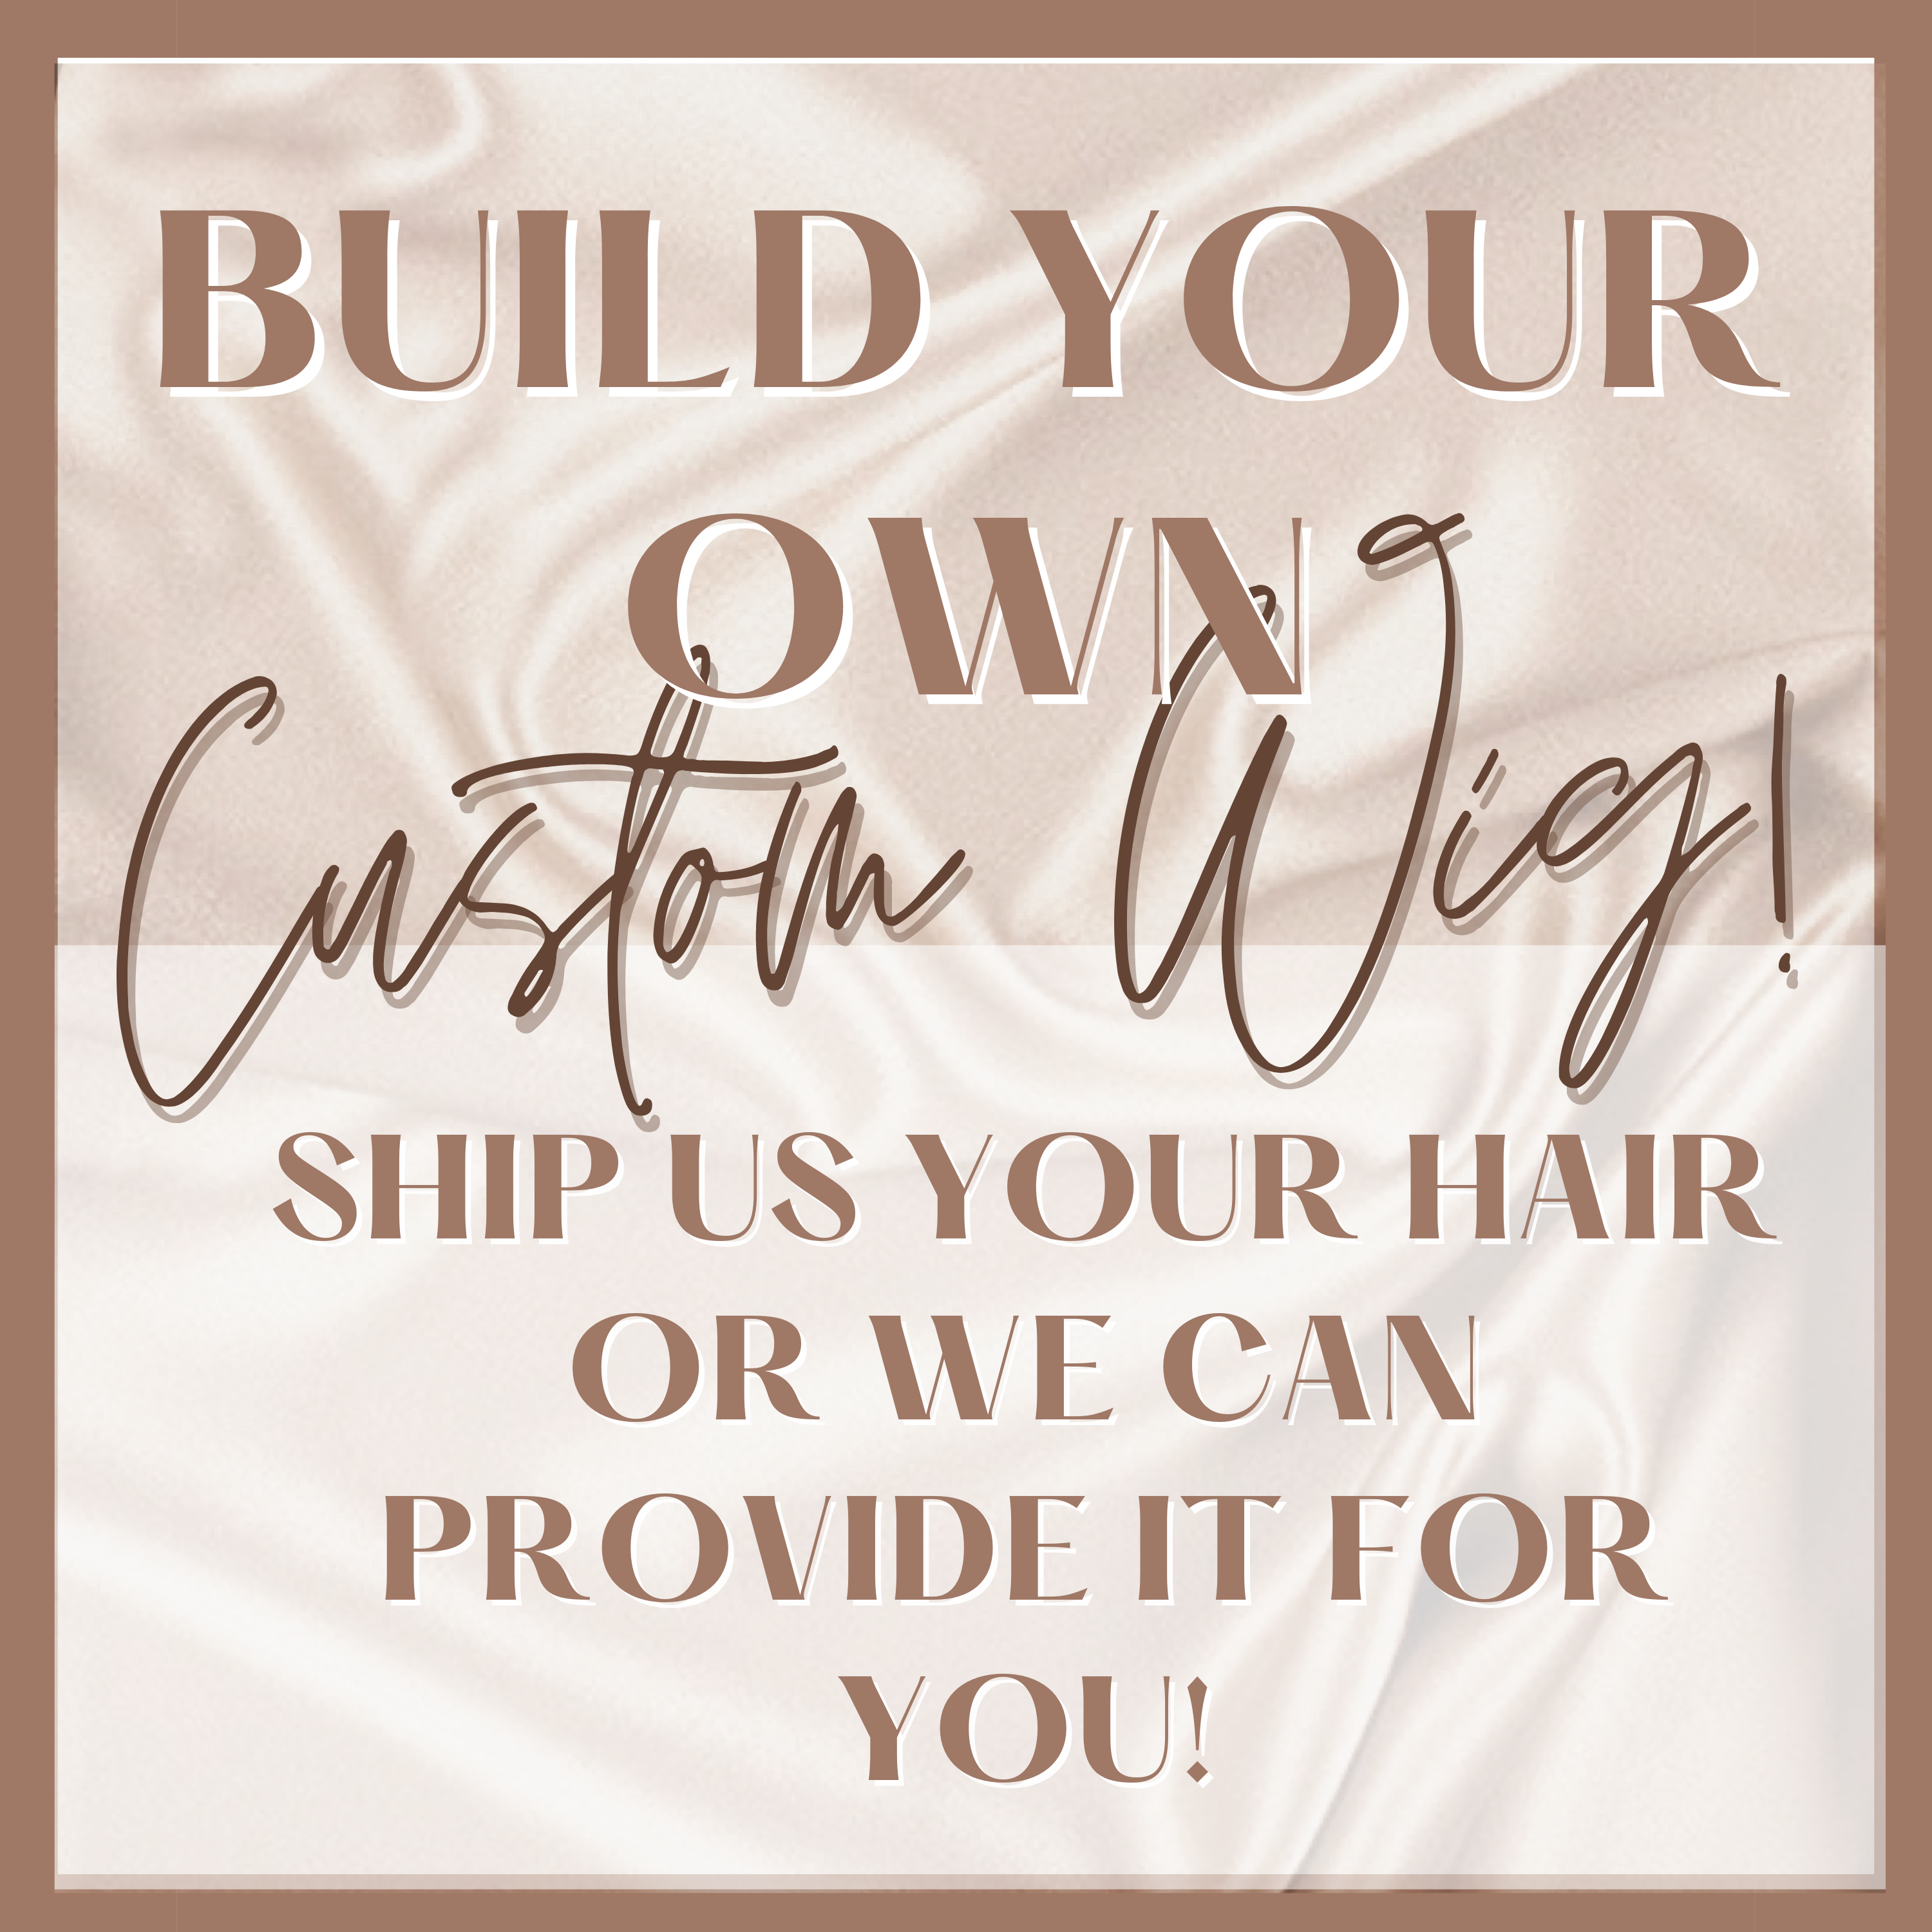 Build Your Own Custom Wig